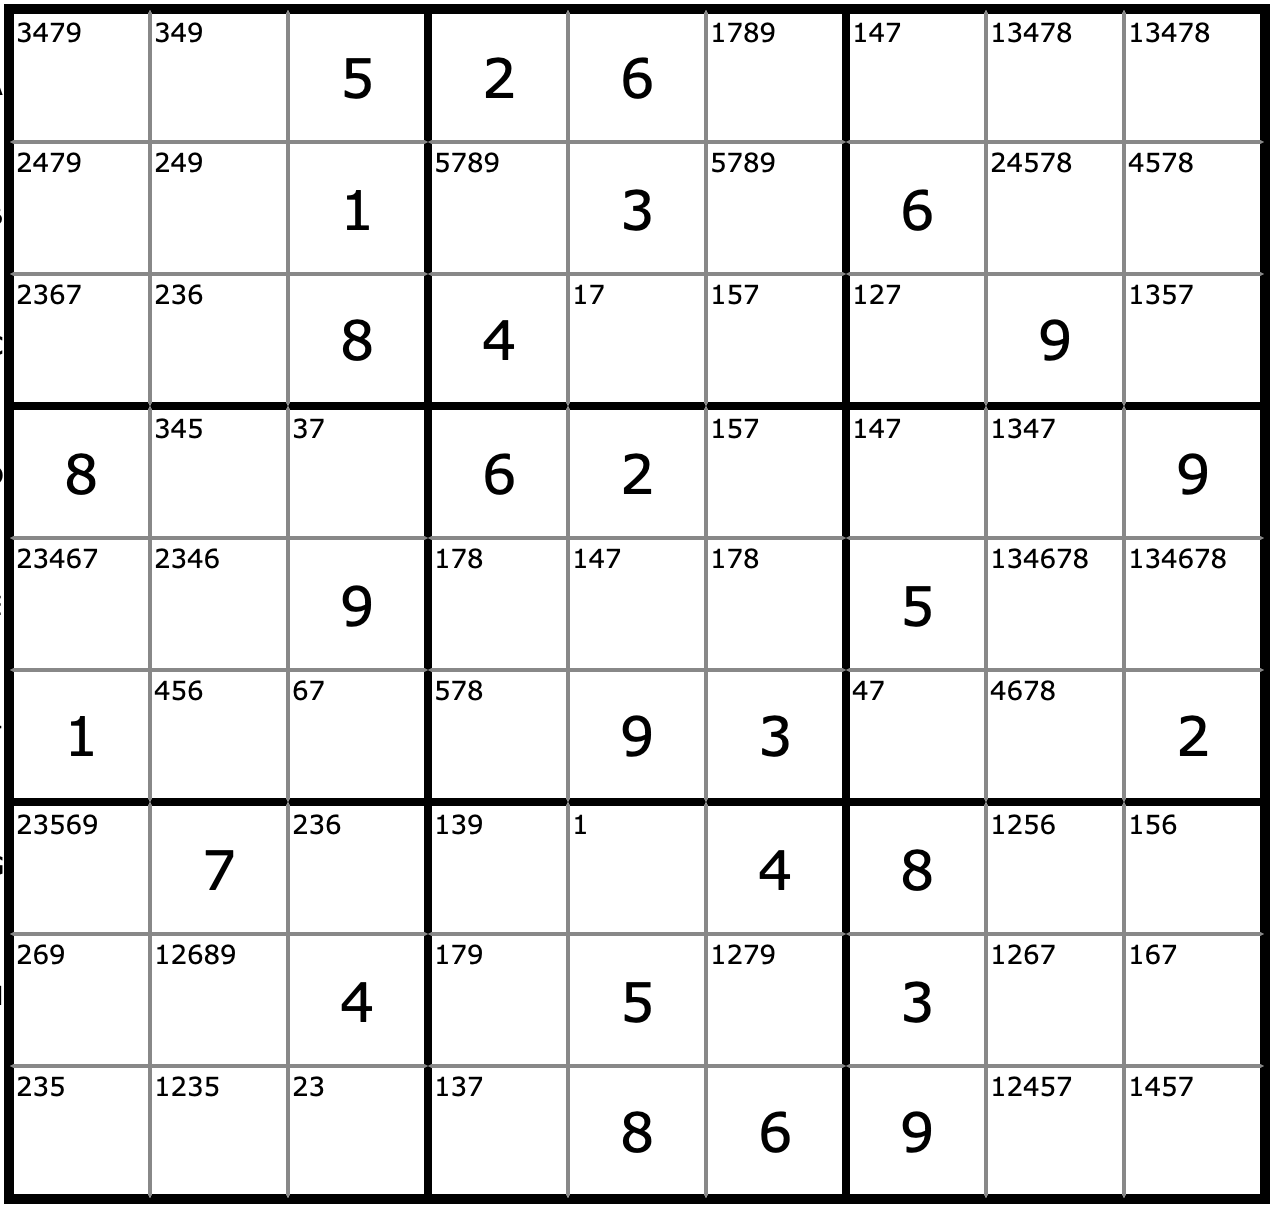 Sudoku Tutorial: Going From Easy/Medium To Hard Puzzles 